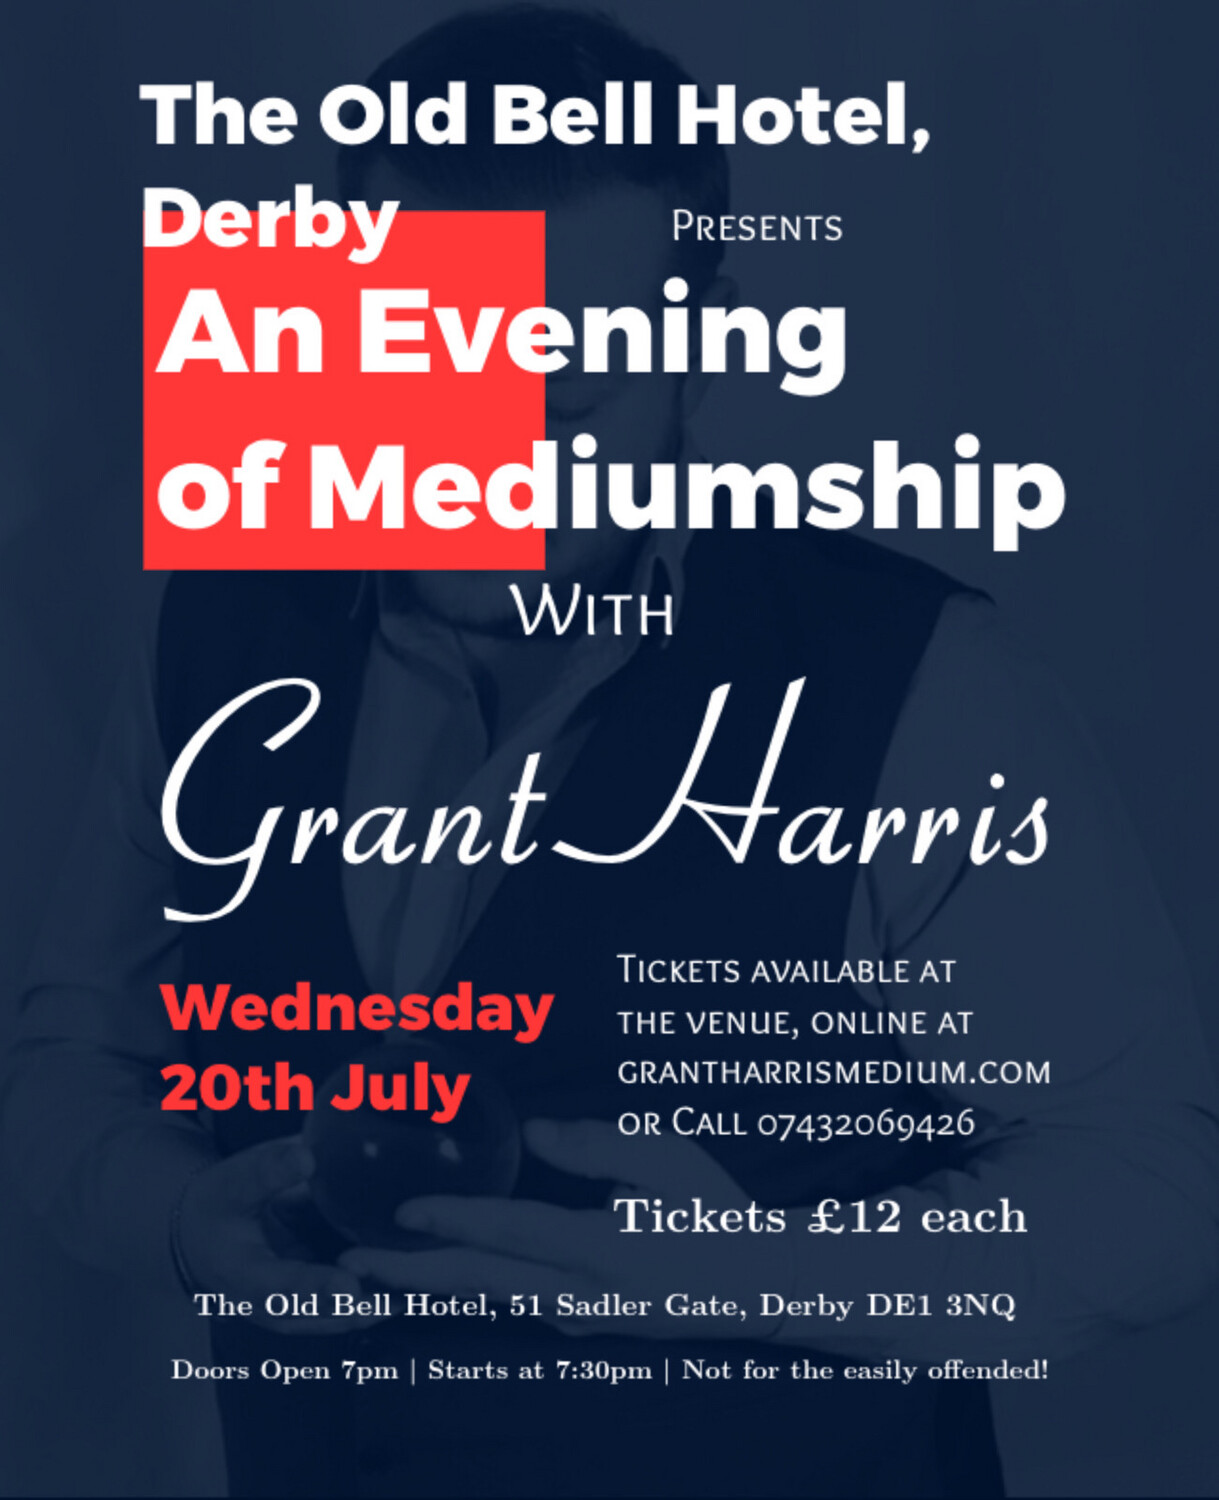 Evening of Mediumship, The Old Bell Hotel, Wed 20th July 2022